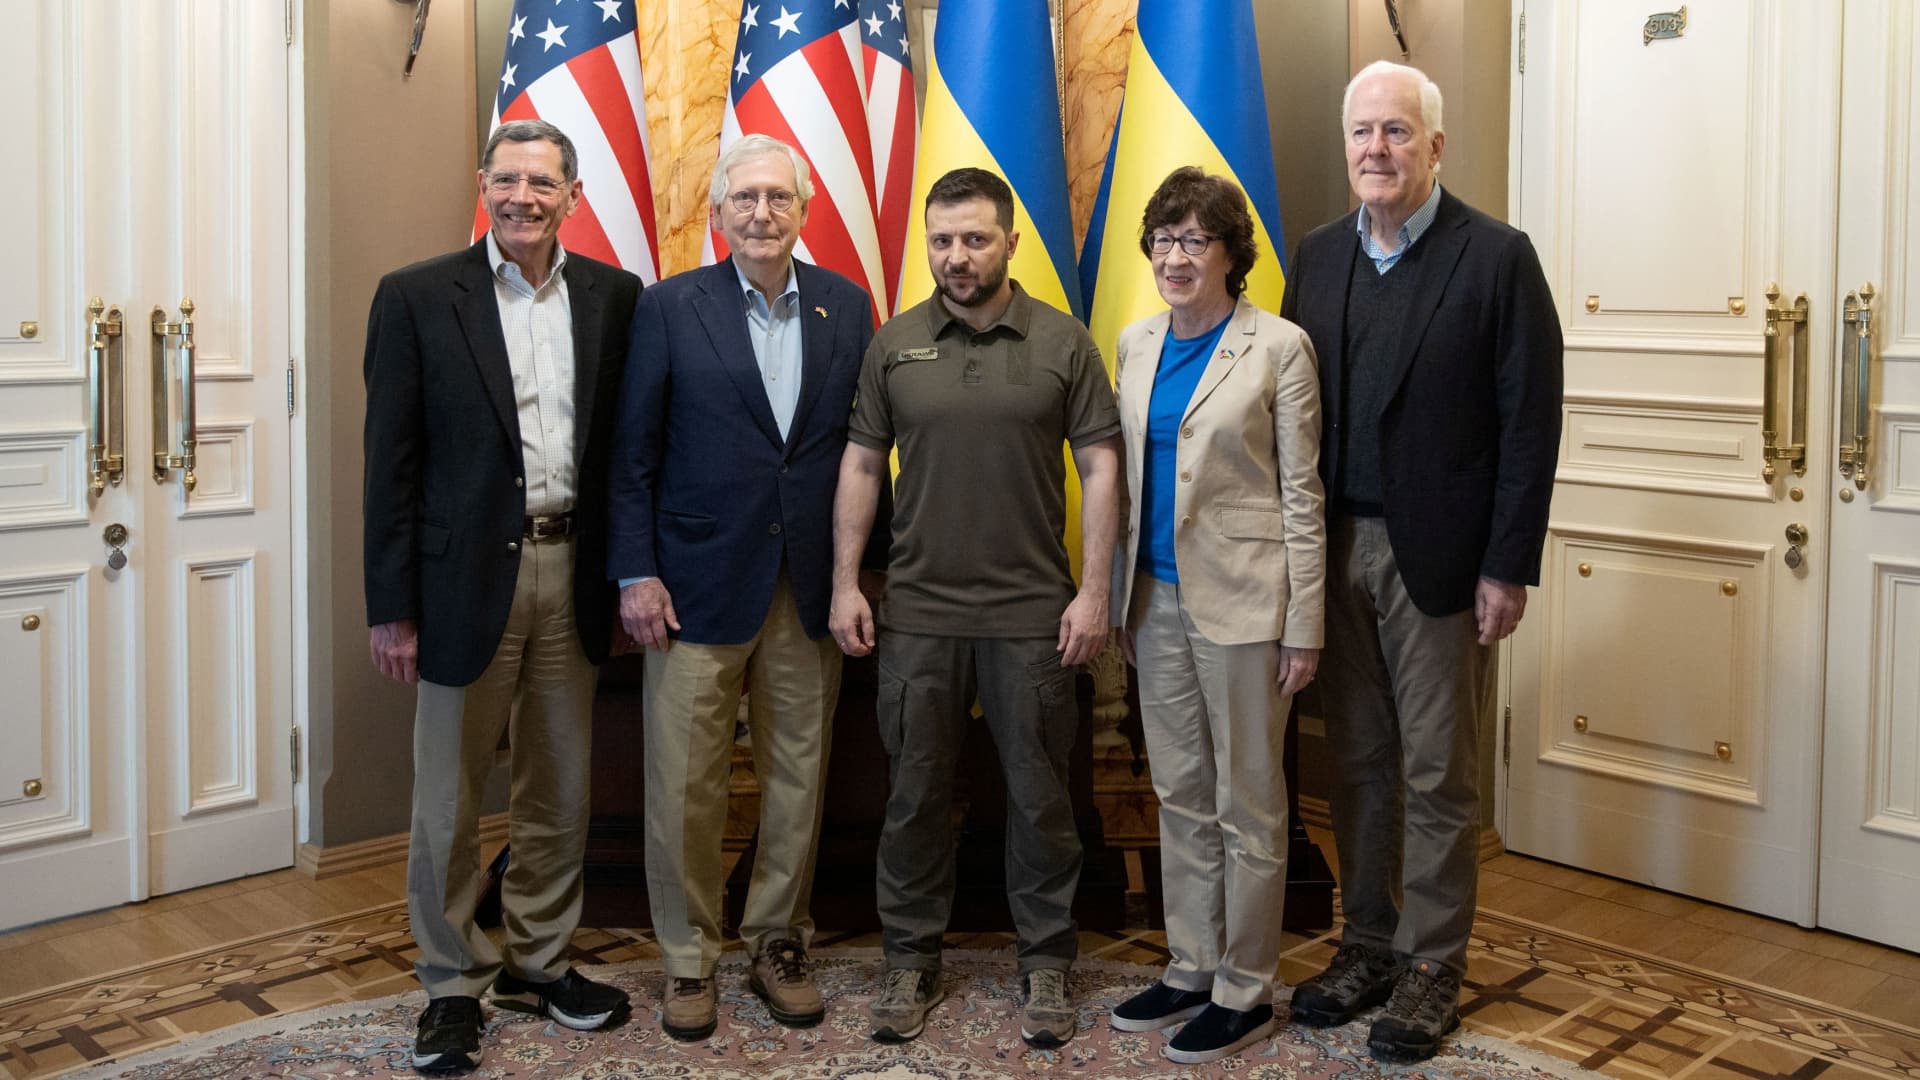 McConnell leads Senate delegation to meet with Zelenskyy in Ukraine